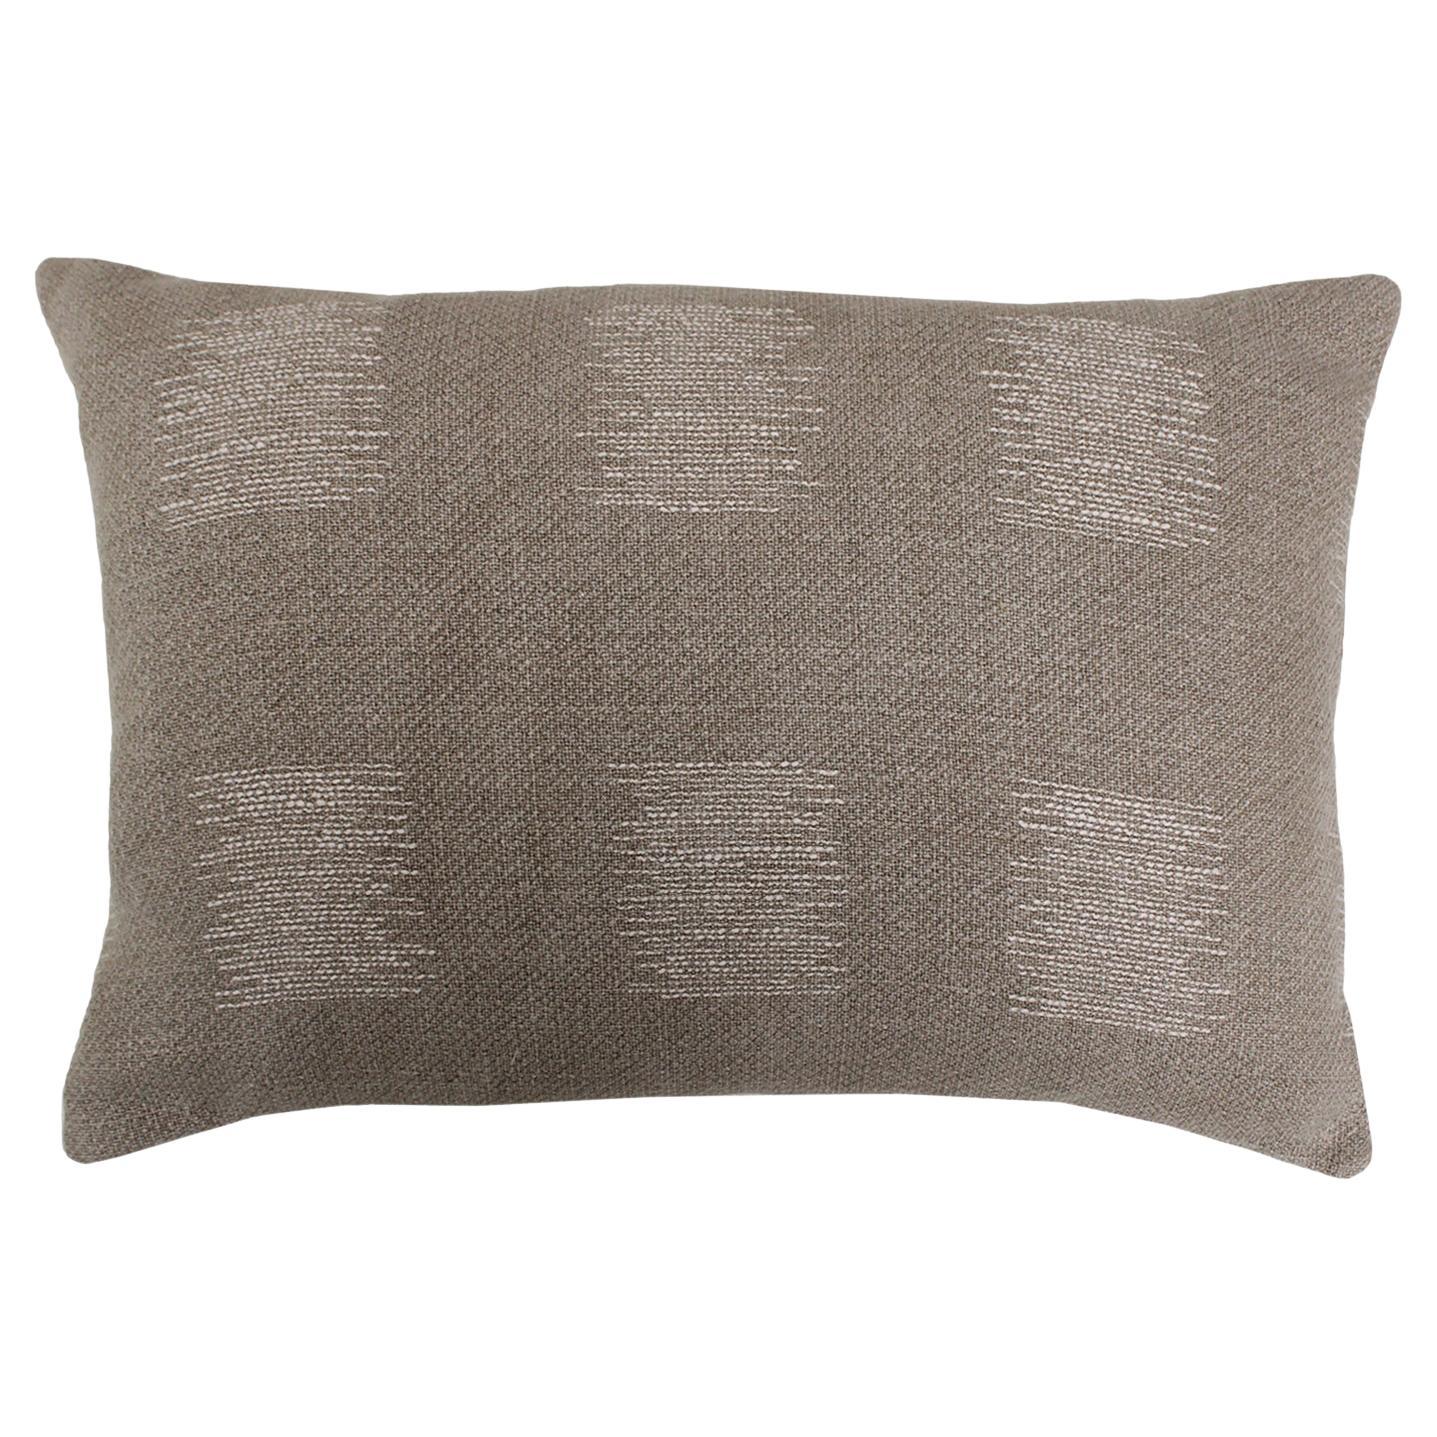 Cushion in Sand Linen with Double Tinsel Trim and Linen White Back